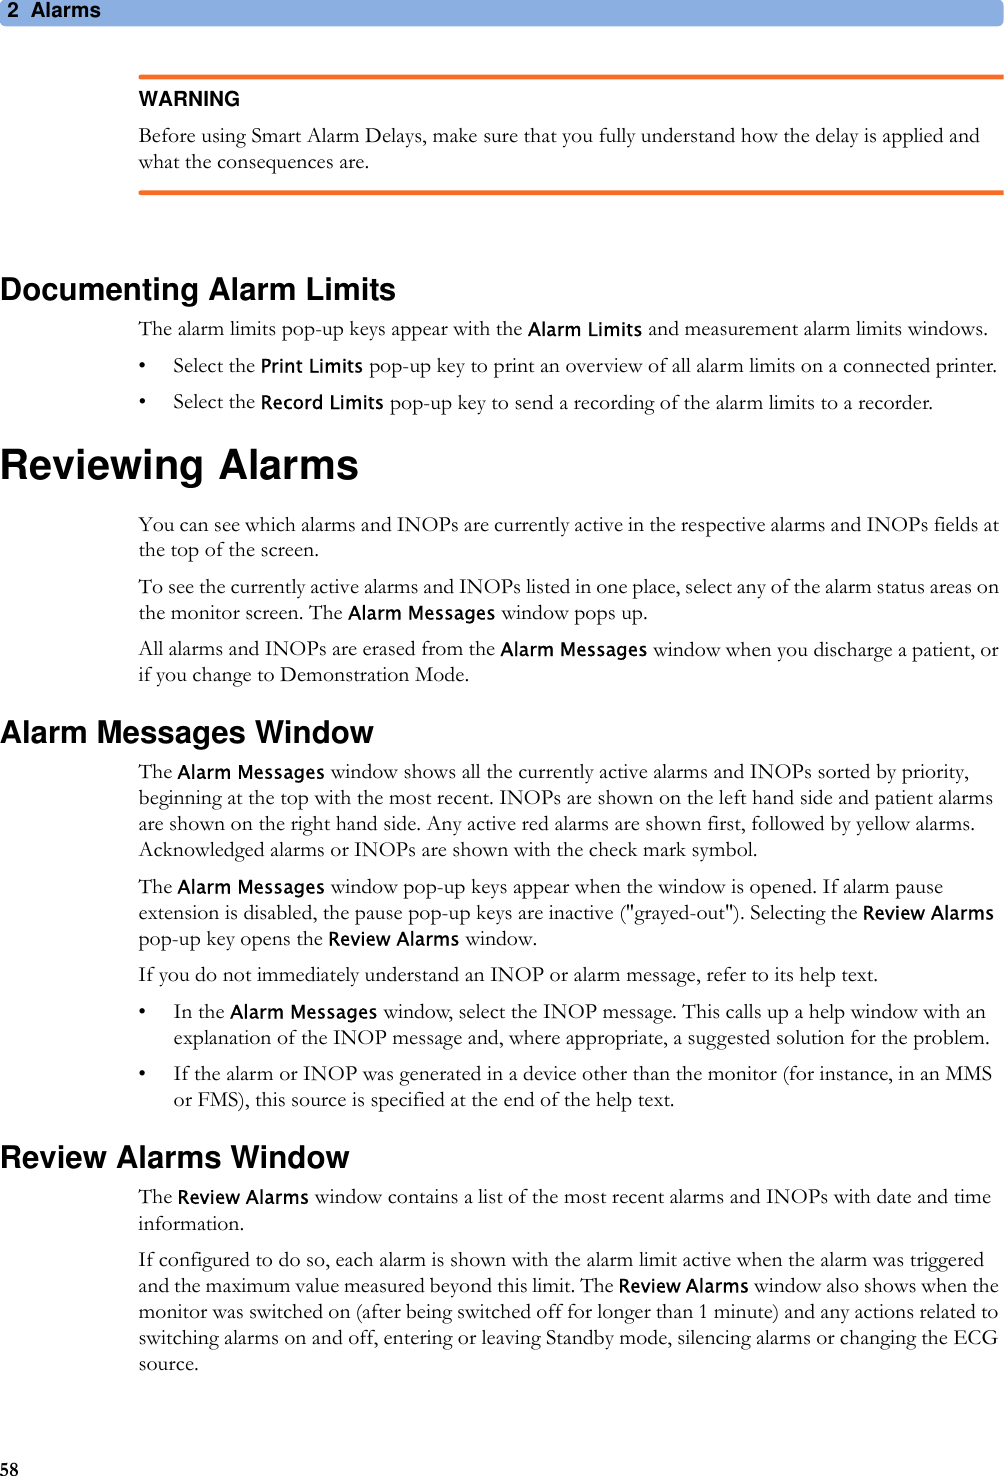 2Alarms58WARNINGBefore using Smart Alarm Delays, make sure that you fully understand how the delay is applied and what the consequences are.Documenting Alarm LimitsThe alarm limits pop-up keys appear with the Alarm Limits and measurement alarm limits windows.• Select the Print Limits pop-up key to print an overview of all alarm limits on a connected printer.• Select the Record Limits pop-up key to send a recording of the alarm limits to a recorder.Reviewing AlarmsYou can see which alarms and INOPs are currently active in the respective alarms and INOPs fields at the top of the screen.To see the currently active alarms and INOPs listed in one place, select any of the alarm status areas on the monitor screen. The Alarm Messages window pops up.All alarms and INOPs are erased from the Alarm Messages window when you discharge a patient, or if you change to Demonstration Mode.Alarm Messages WindowThe Alarm Messages window shows all the currently active alarms and INOPs sorted by priority, beginning at the top with the most recent. INOPs are shown on the left hand side and patient alarms are shown on the right hand side. Any active red alarms are shown first, followed by yellow alarms. Acknowledged alarms or INOPs are shown with the check mark symbol.The Alarm Messages window pop-up keys appear when the window is opened. If alarm pause extension is disabled, the pause pop-up keys are inactive (&quot;grayed-out&quot;). Selecting the Review Alarms pop-up key opens the Review Alarms window.If you do not immediately understand an INOP or alarm message, refer to its help text.•In the Alarm Messages window, select the INOP message. This calls up a help window with an explanation of the INOP message and, where appropriate, a suggested solution for the problem.• If the alarm or INOP was generated in a device other than the monitor (for instance, in an MMS or FMS), this source is specified at the end of the help text.Review Alarms WindowThe Review Alarms window contains a list of the most recent alarms and INOPs with date and time information.If configured to do so, each alarm is shown with the alarm limit active when the alarm was triggered and the maximum value measured beyond this limit. The Review Alarms window also shows when the monitor was switched on (after being switched off for longer than 1 minute) and any actions related to switching alarms on and off, entering or leaving Standby mode, silencing alarms or changing the ECG source.